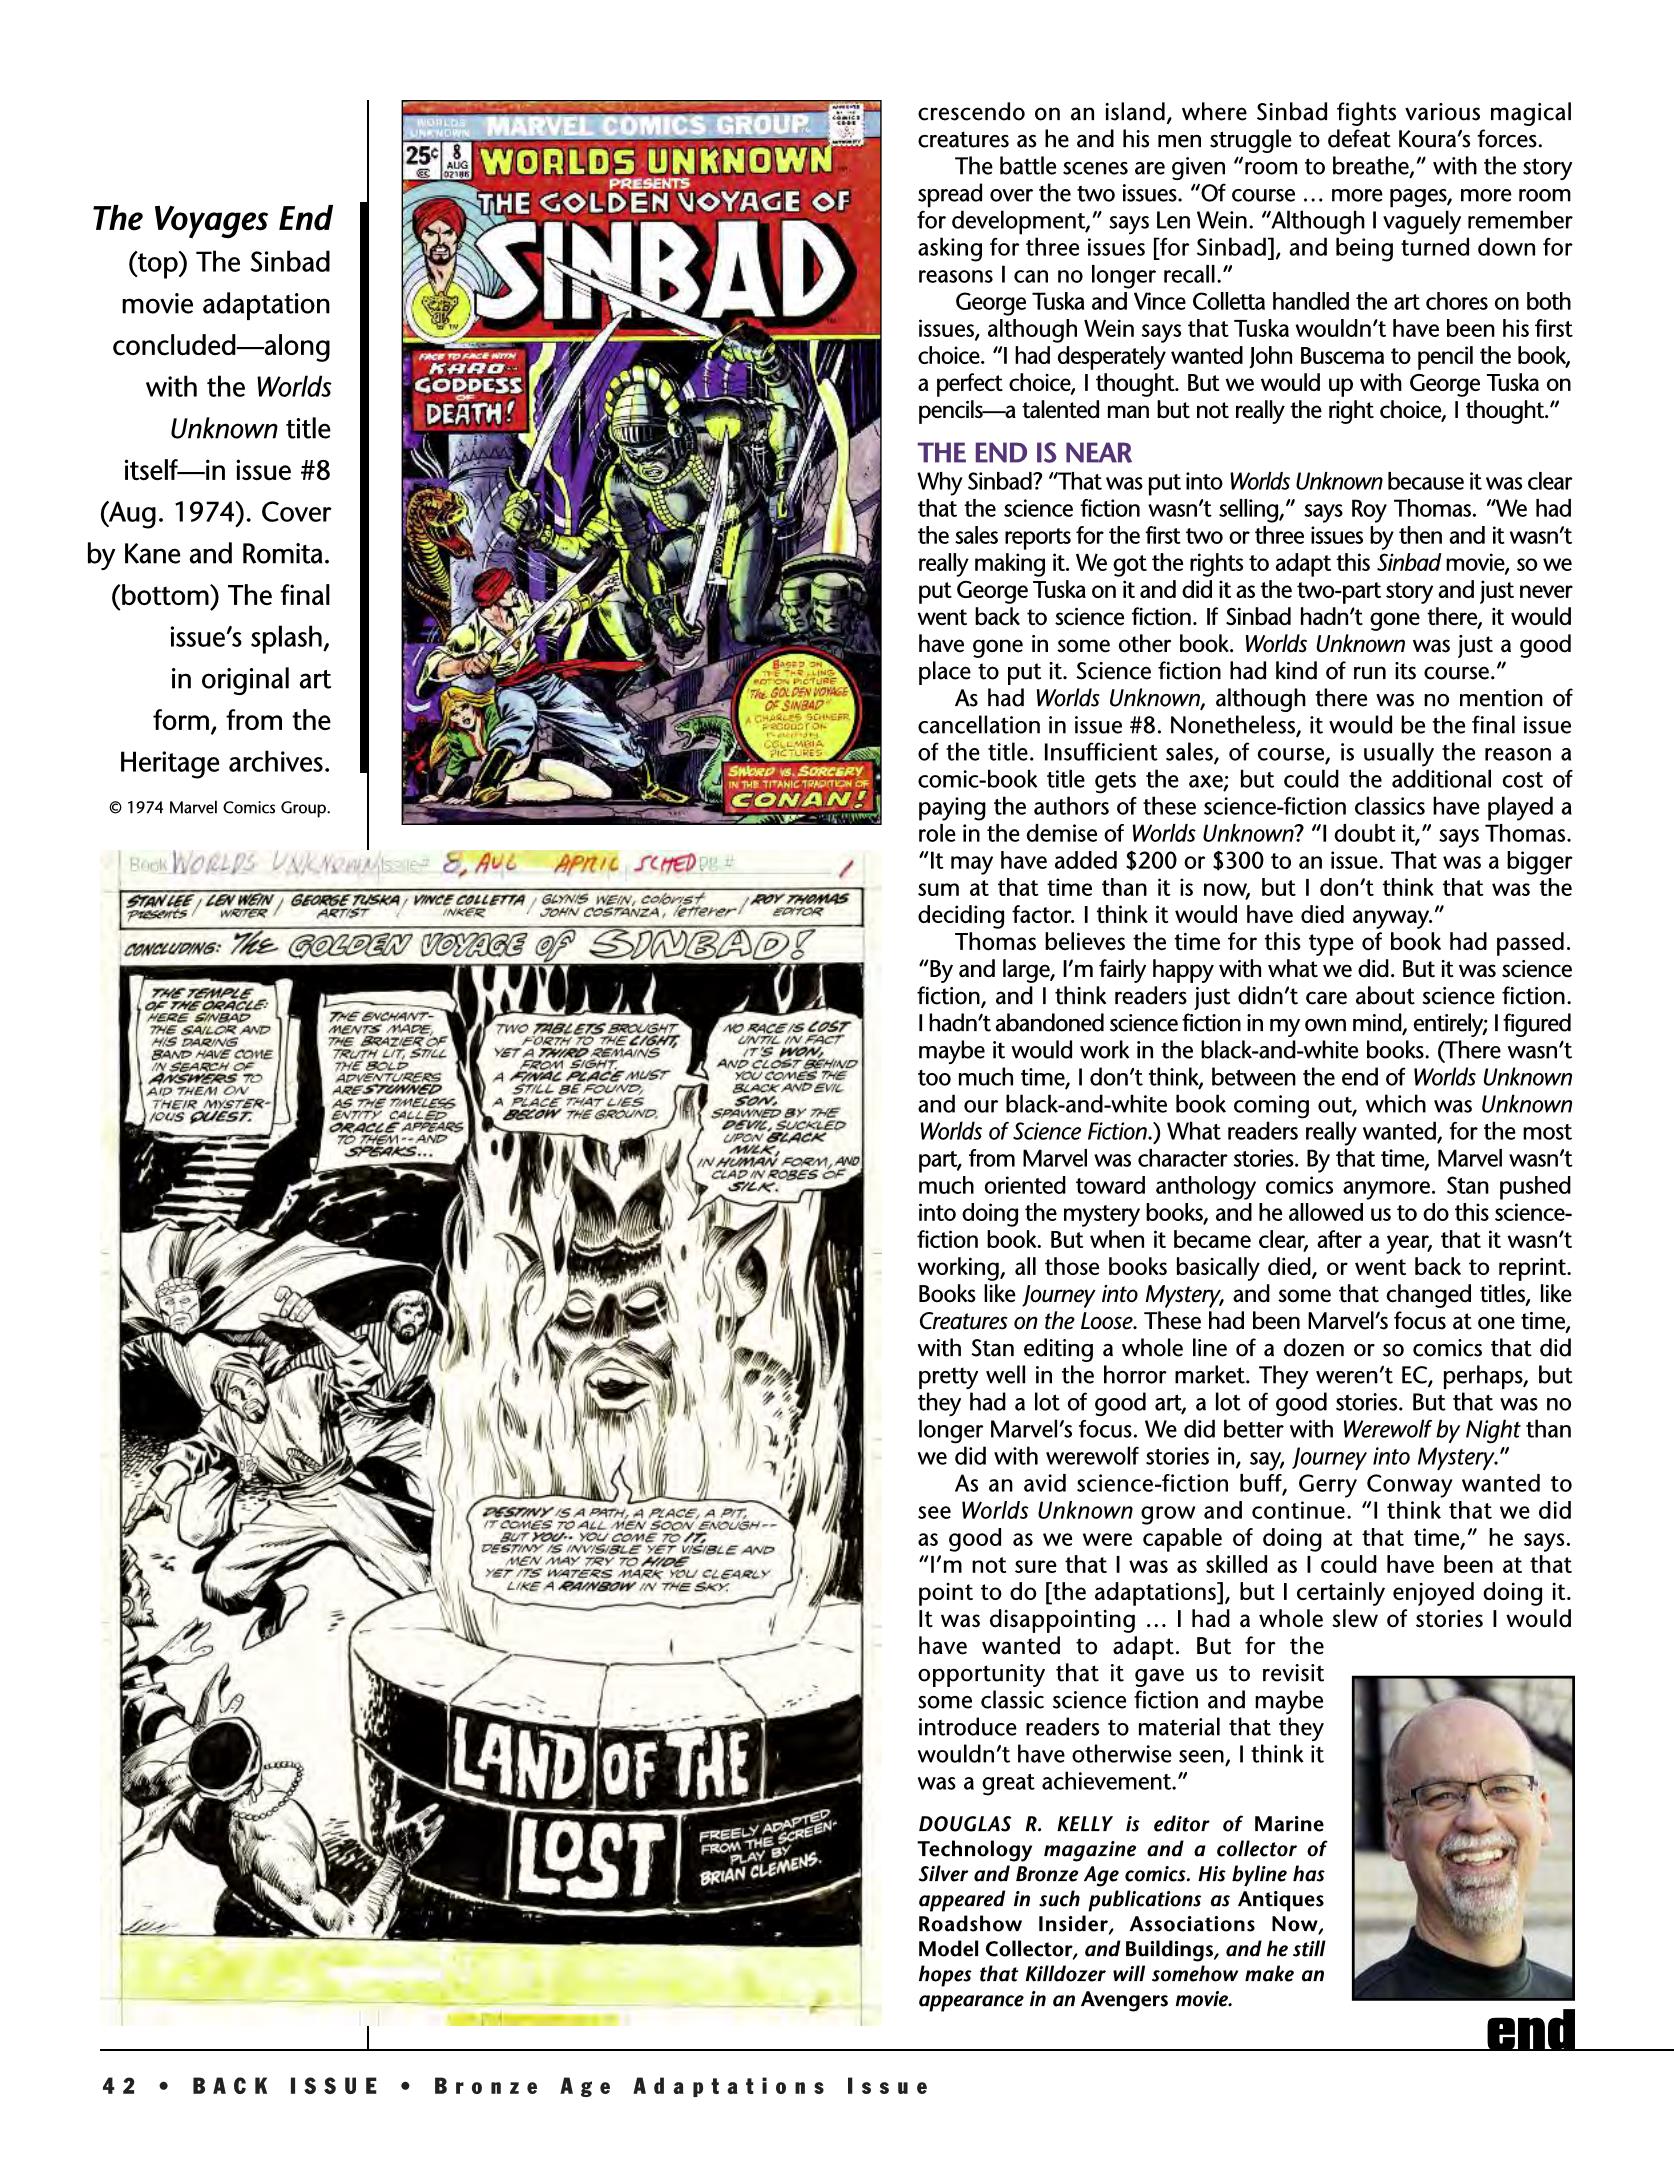 Read online Back Issue comic -  Issue #89 - 39